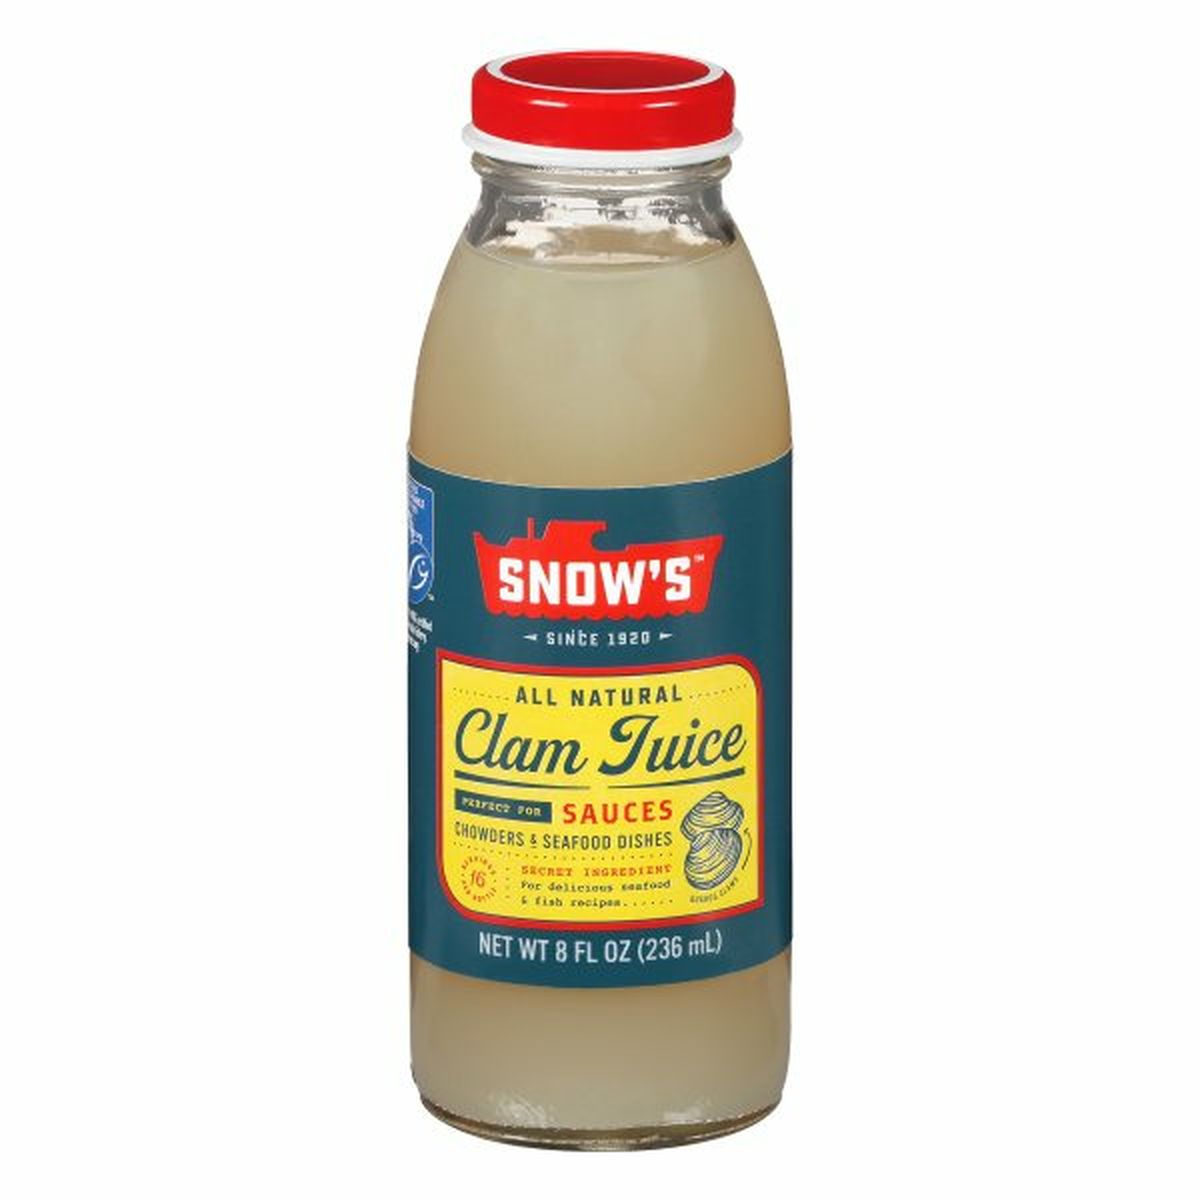 Calories in Snow's Clam Juice, All Natural